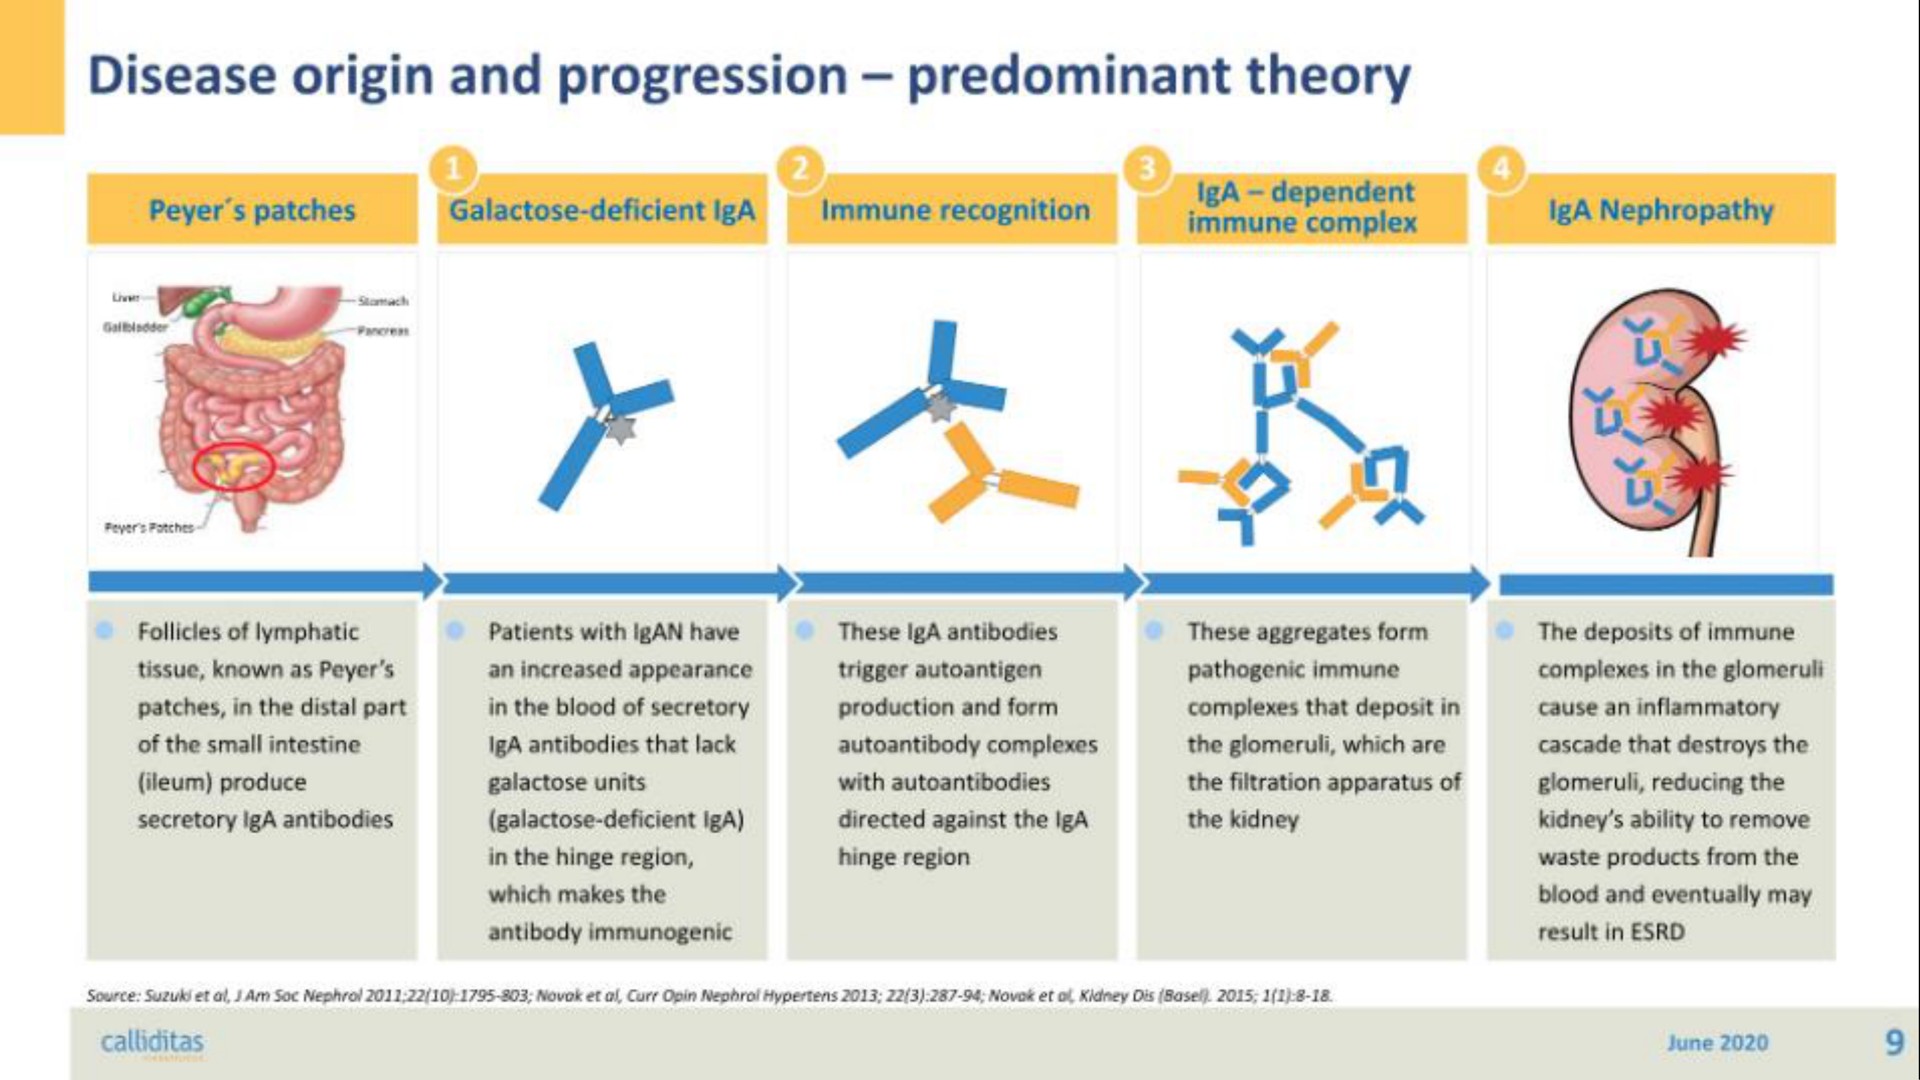 disease origin and progression predominant theory patches galactose deficient immune recognition a | Calliditas Therapeutics